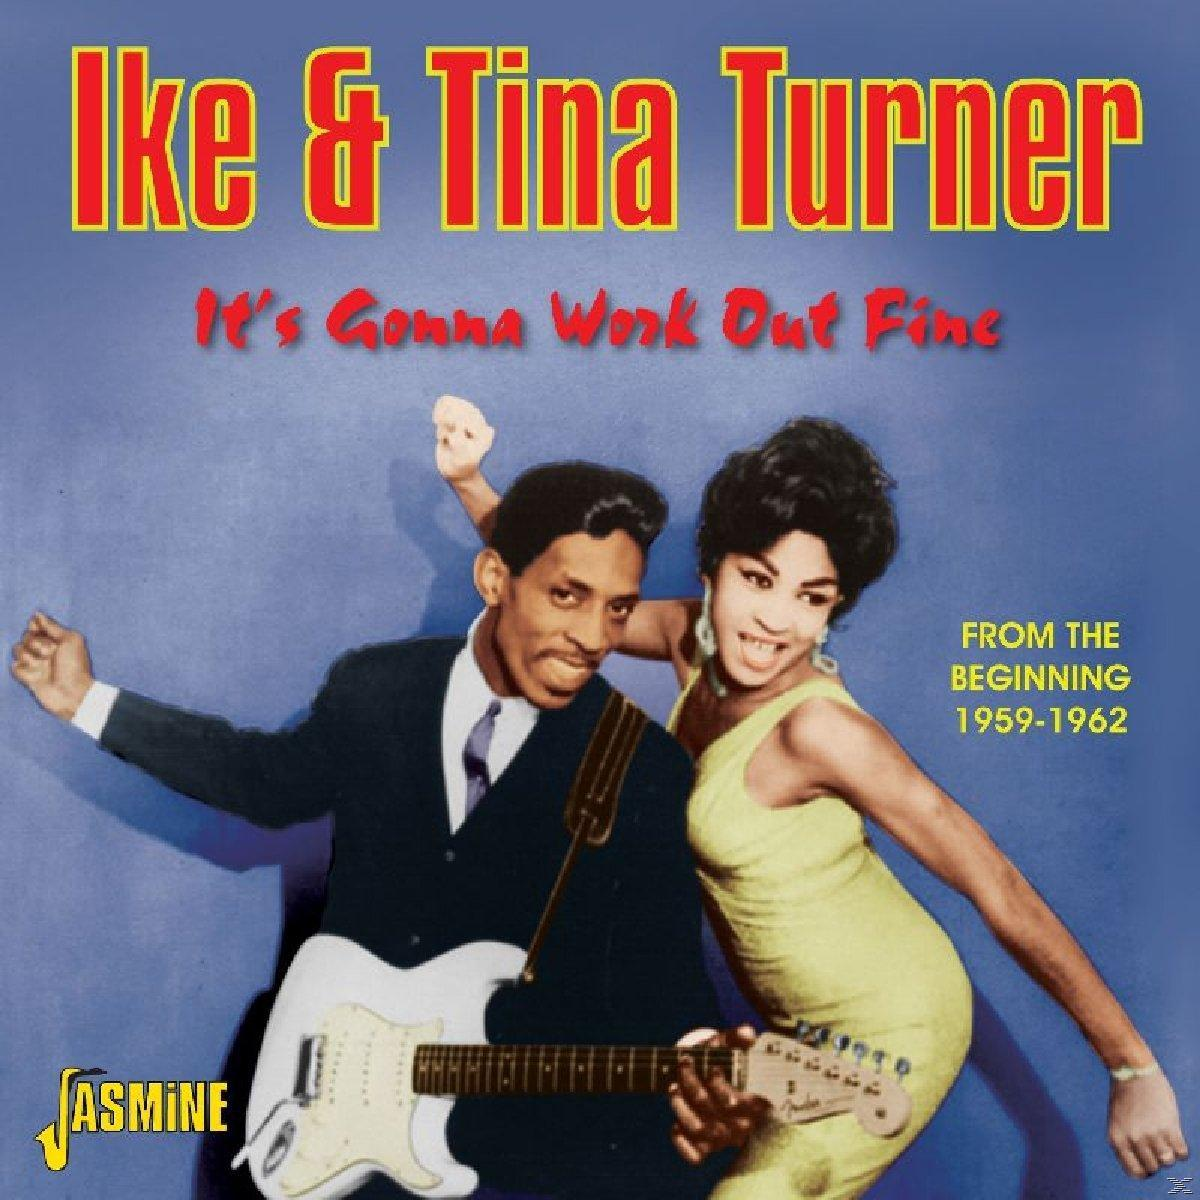 It\'s Work Out - - (CD) Tina Fine Turner Gonna & Ike